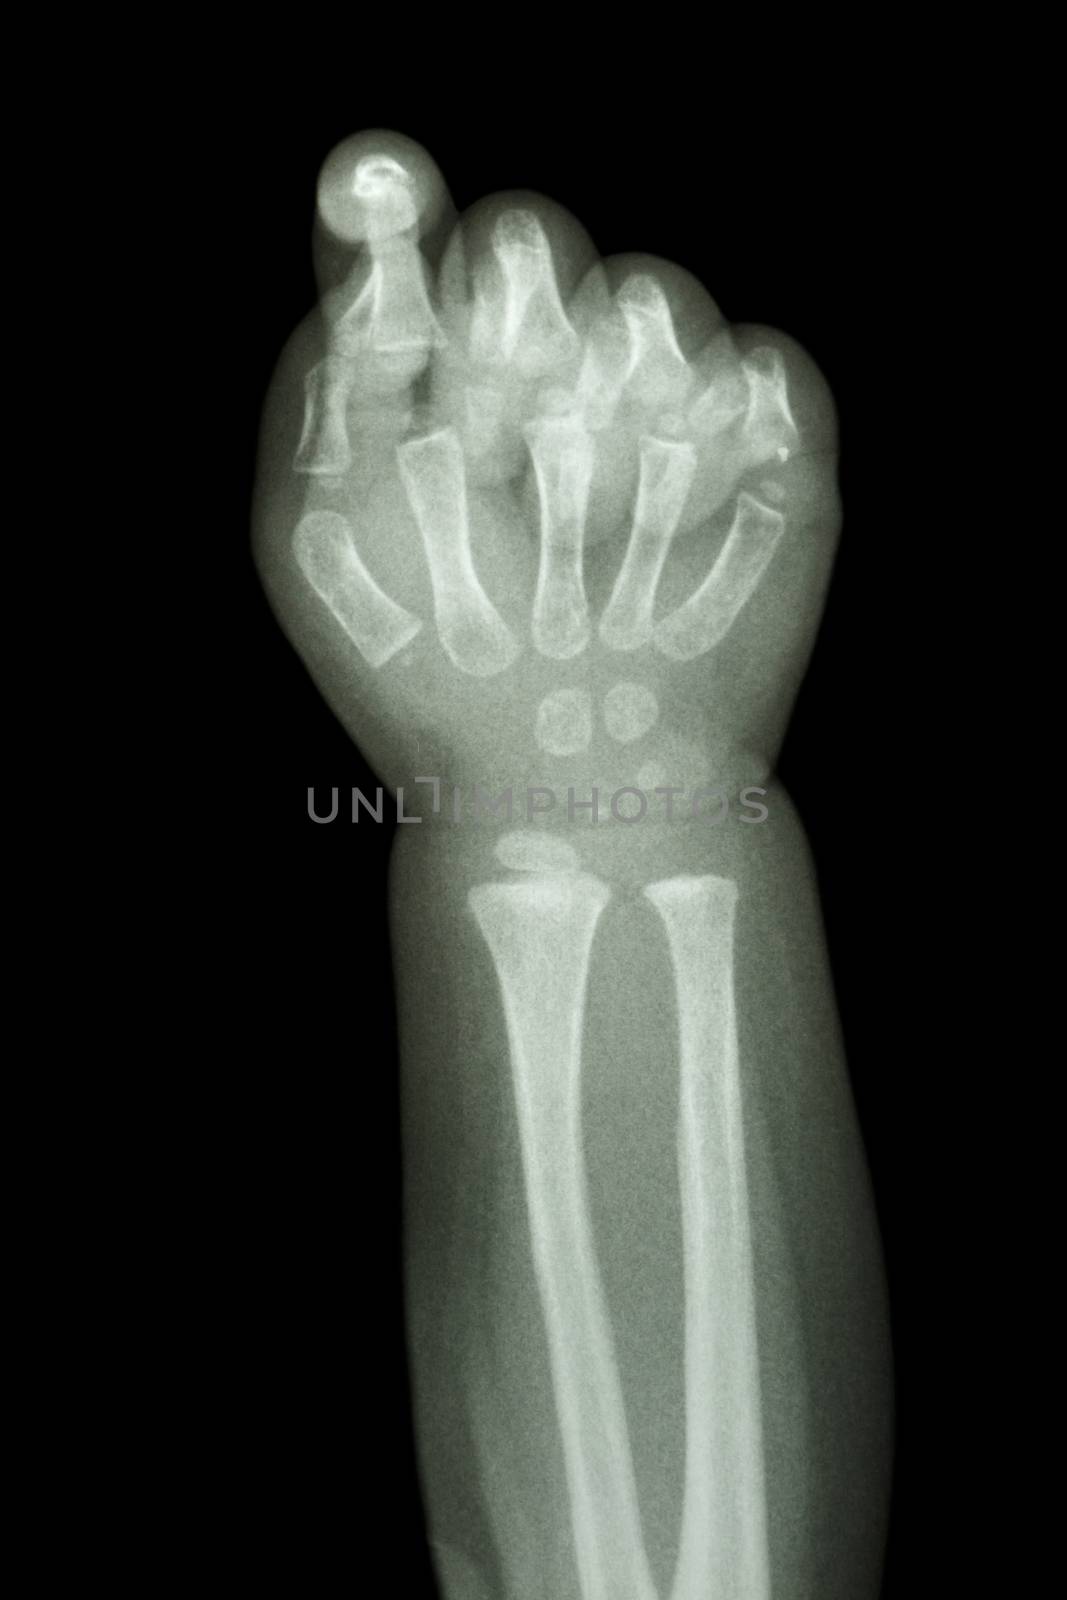 film x-ray forearm and hand : show normal infant's bone